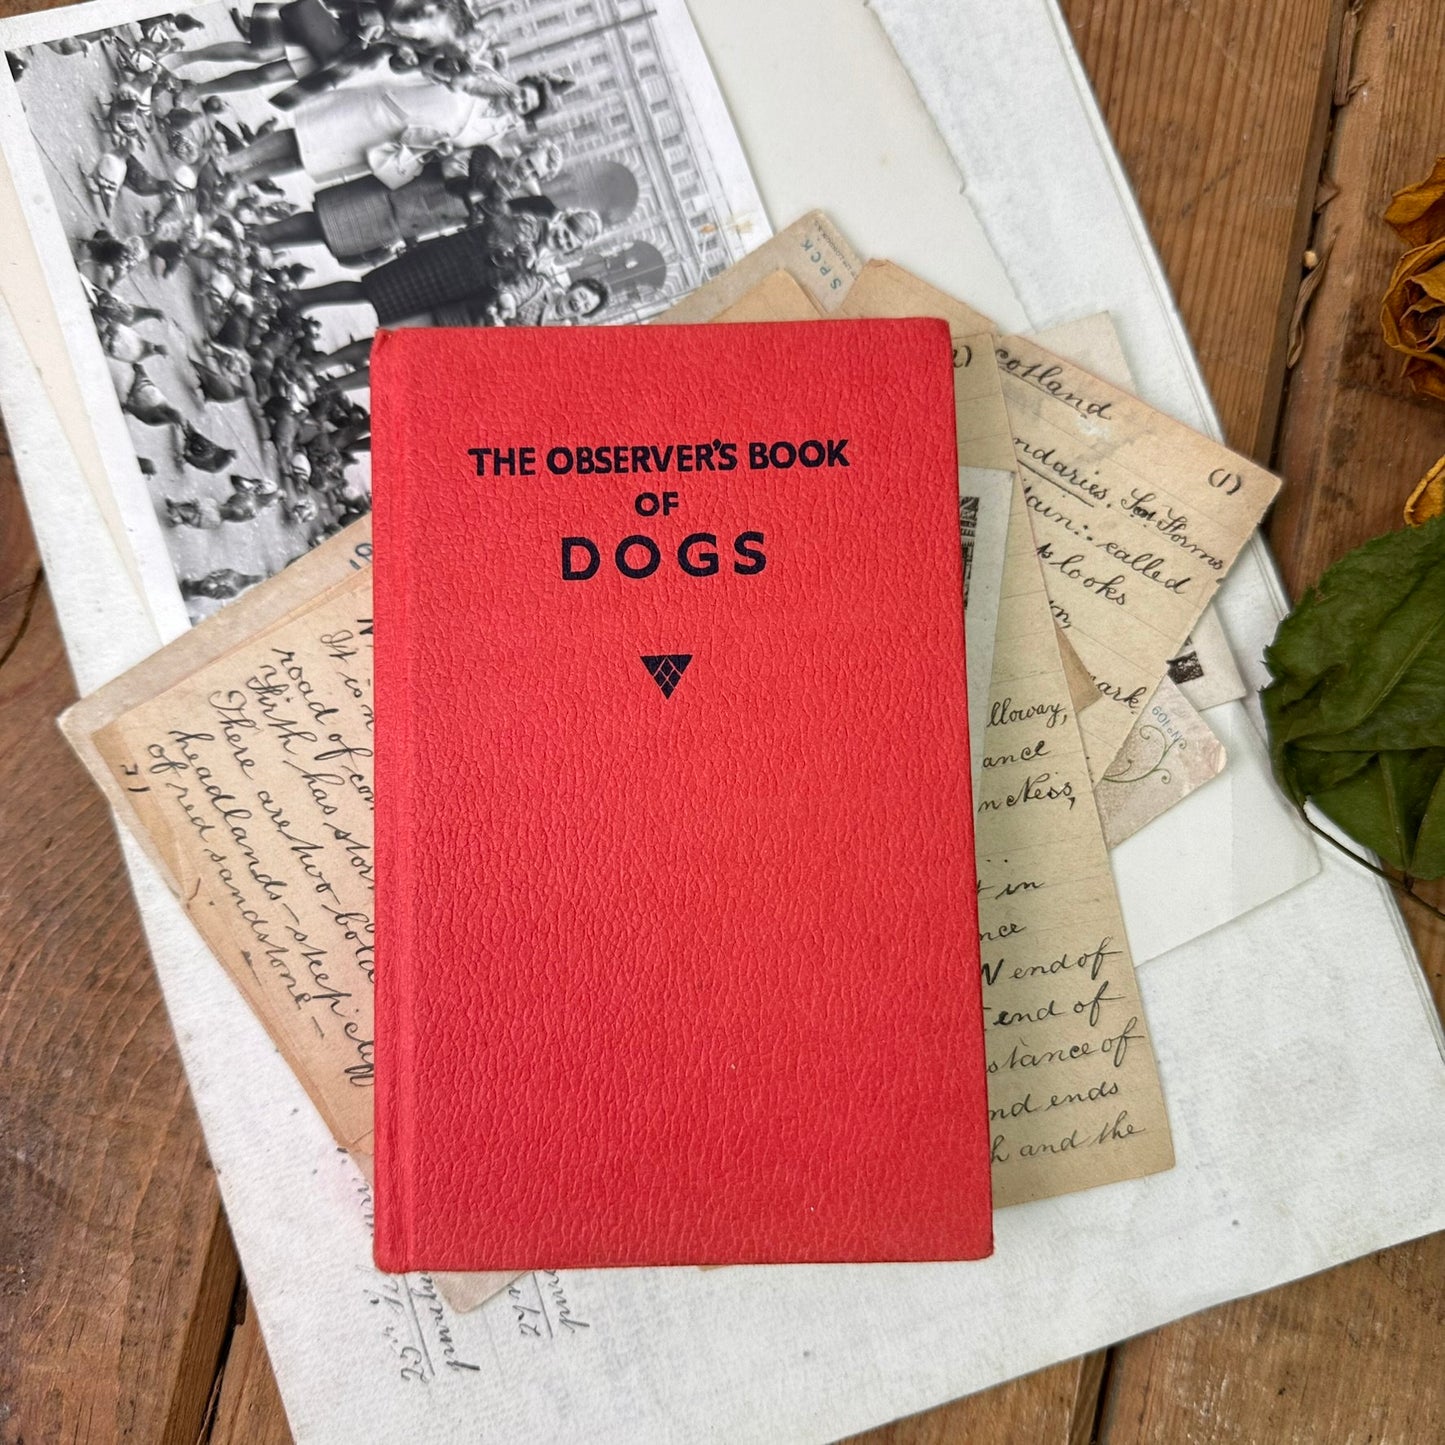 The observer’s book of Dogs